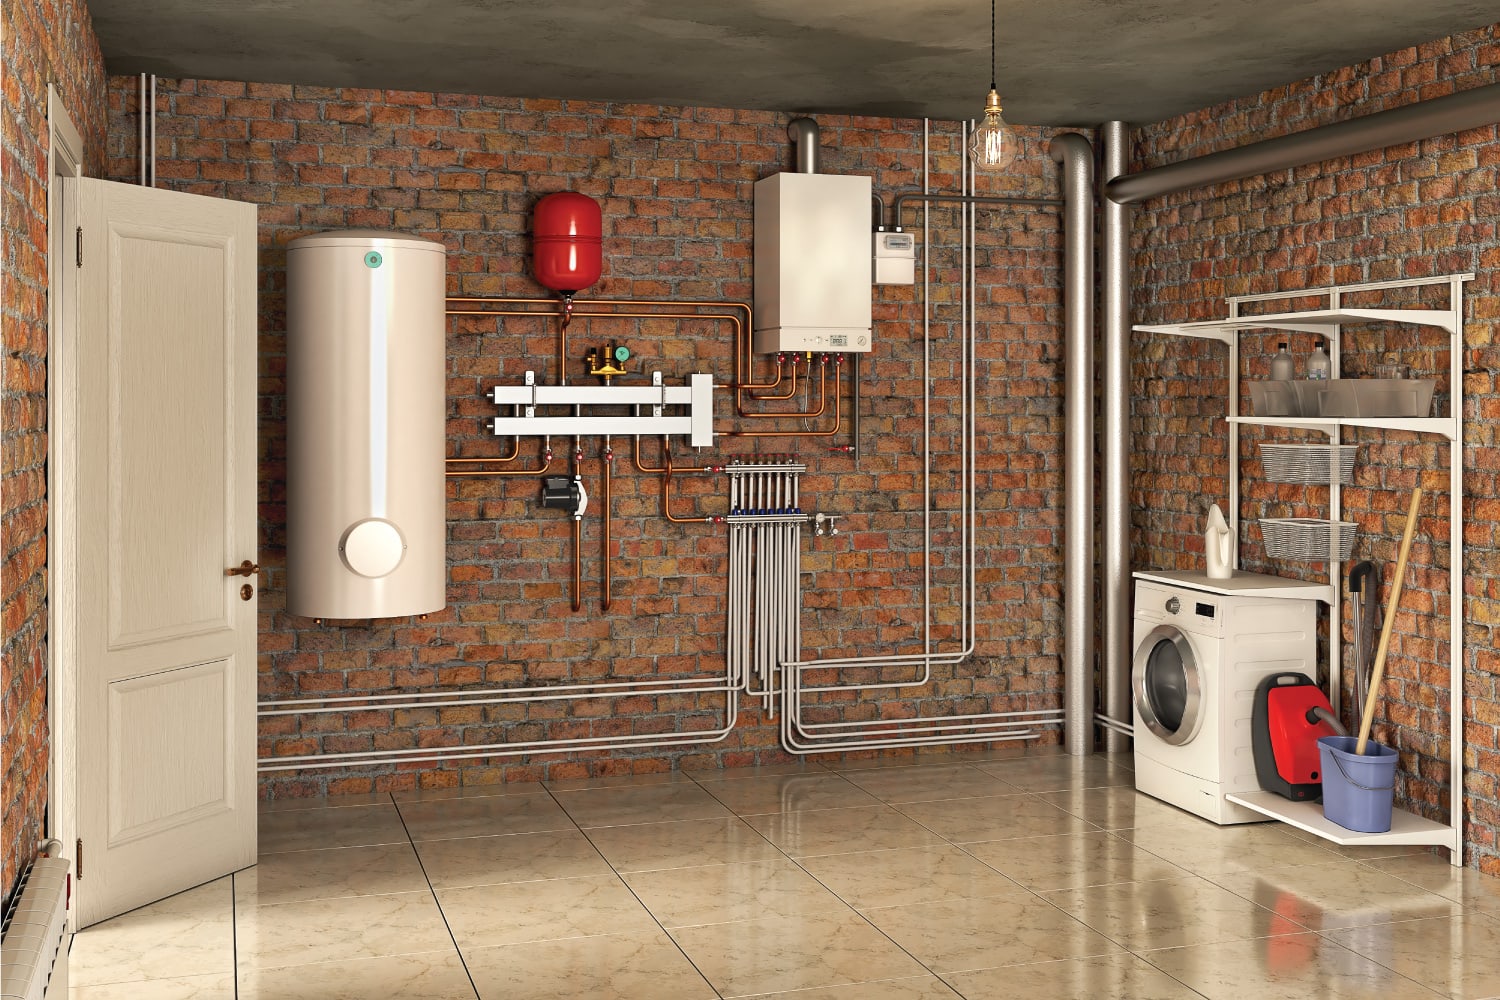 Boiler system and laundry in a basement interior